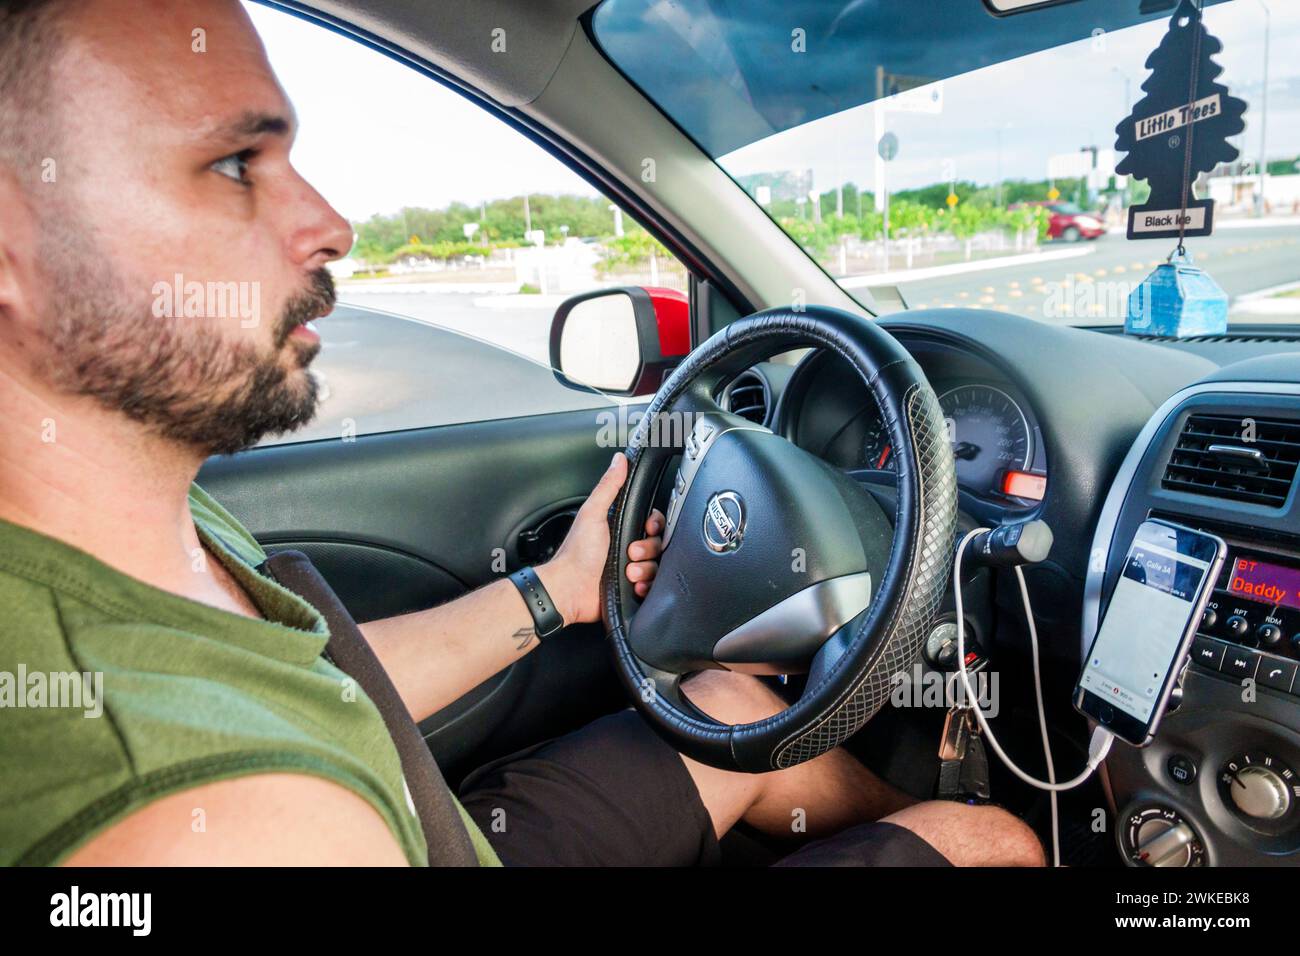 Merida Mexico,Xcumpich Calle 20A,Uber driver,man men male,adult adults,resident residents,driving,inside interior,car vehicle,mobile cell phone app,su Stock Photo